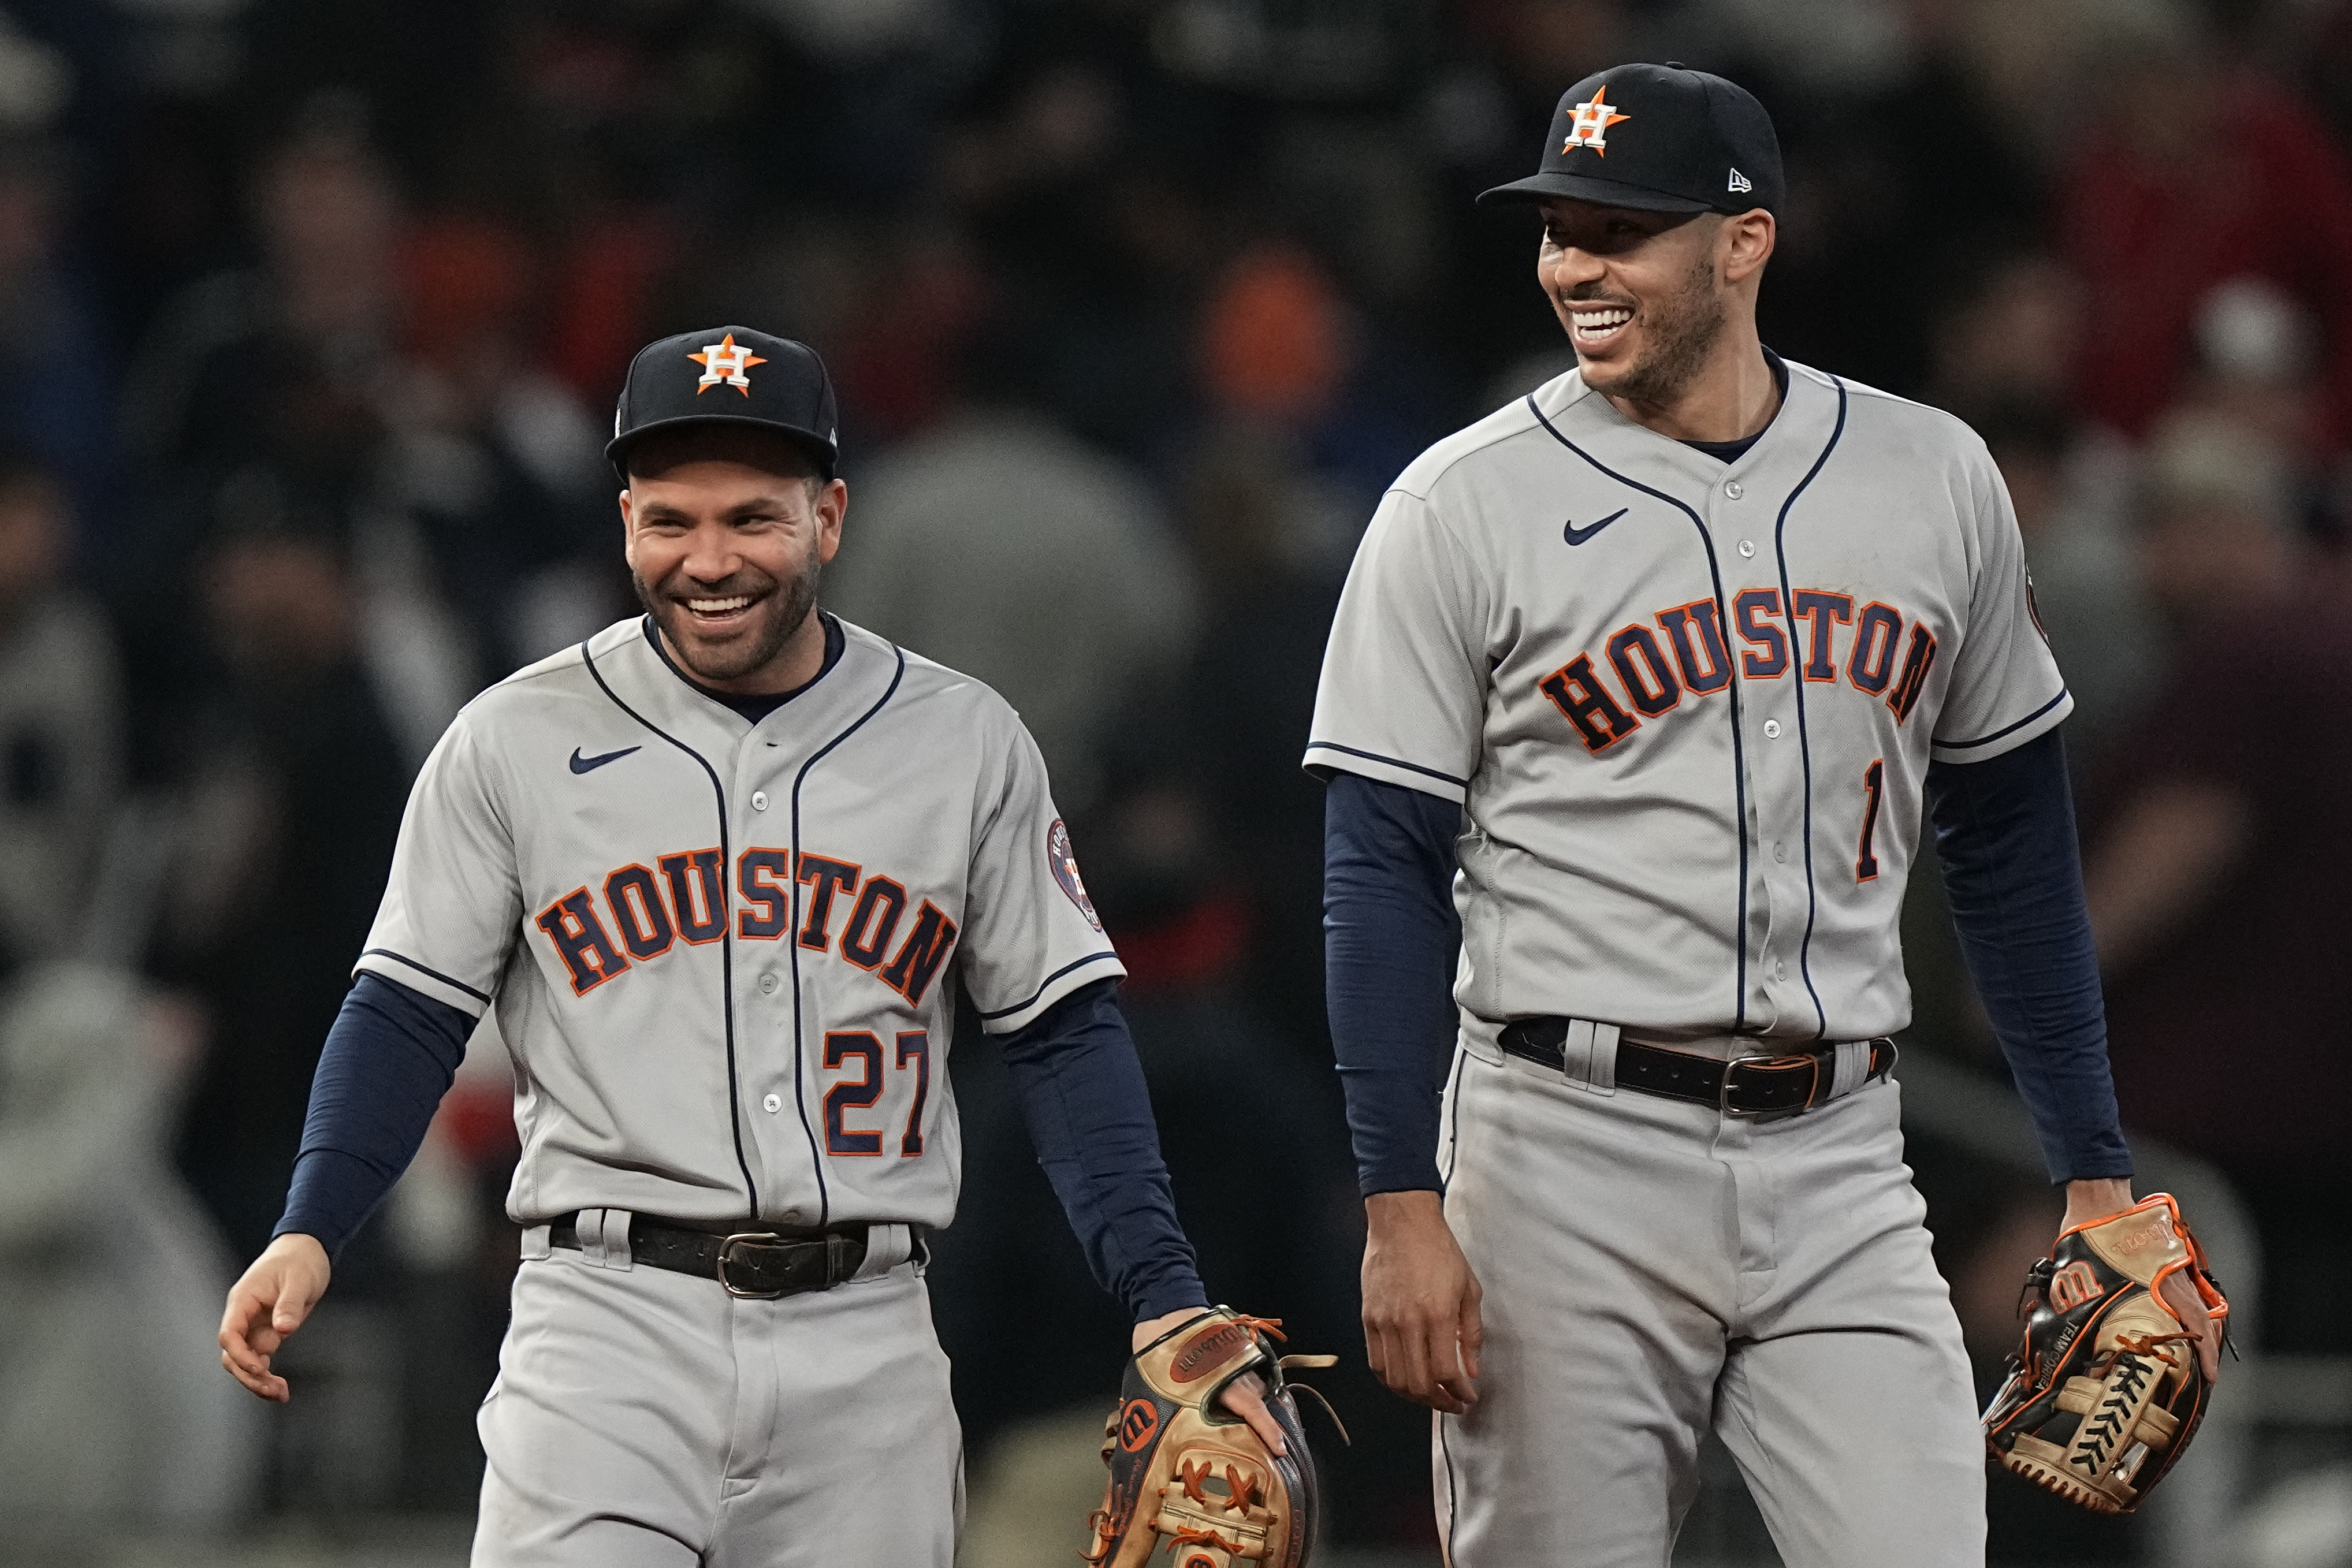 MLB - The Houston Astros' quest for a repeat begins now.